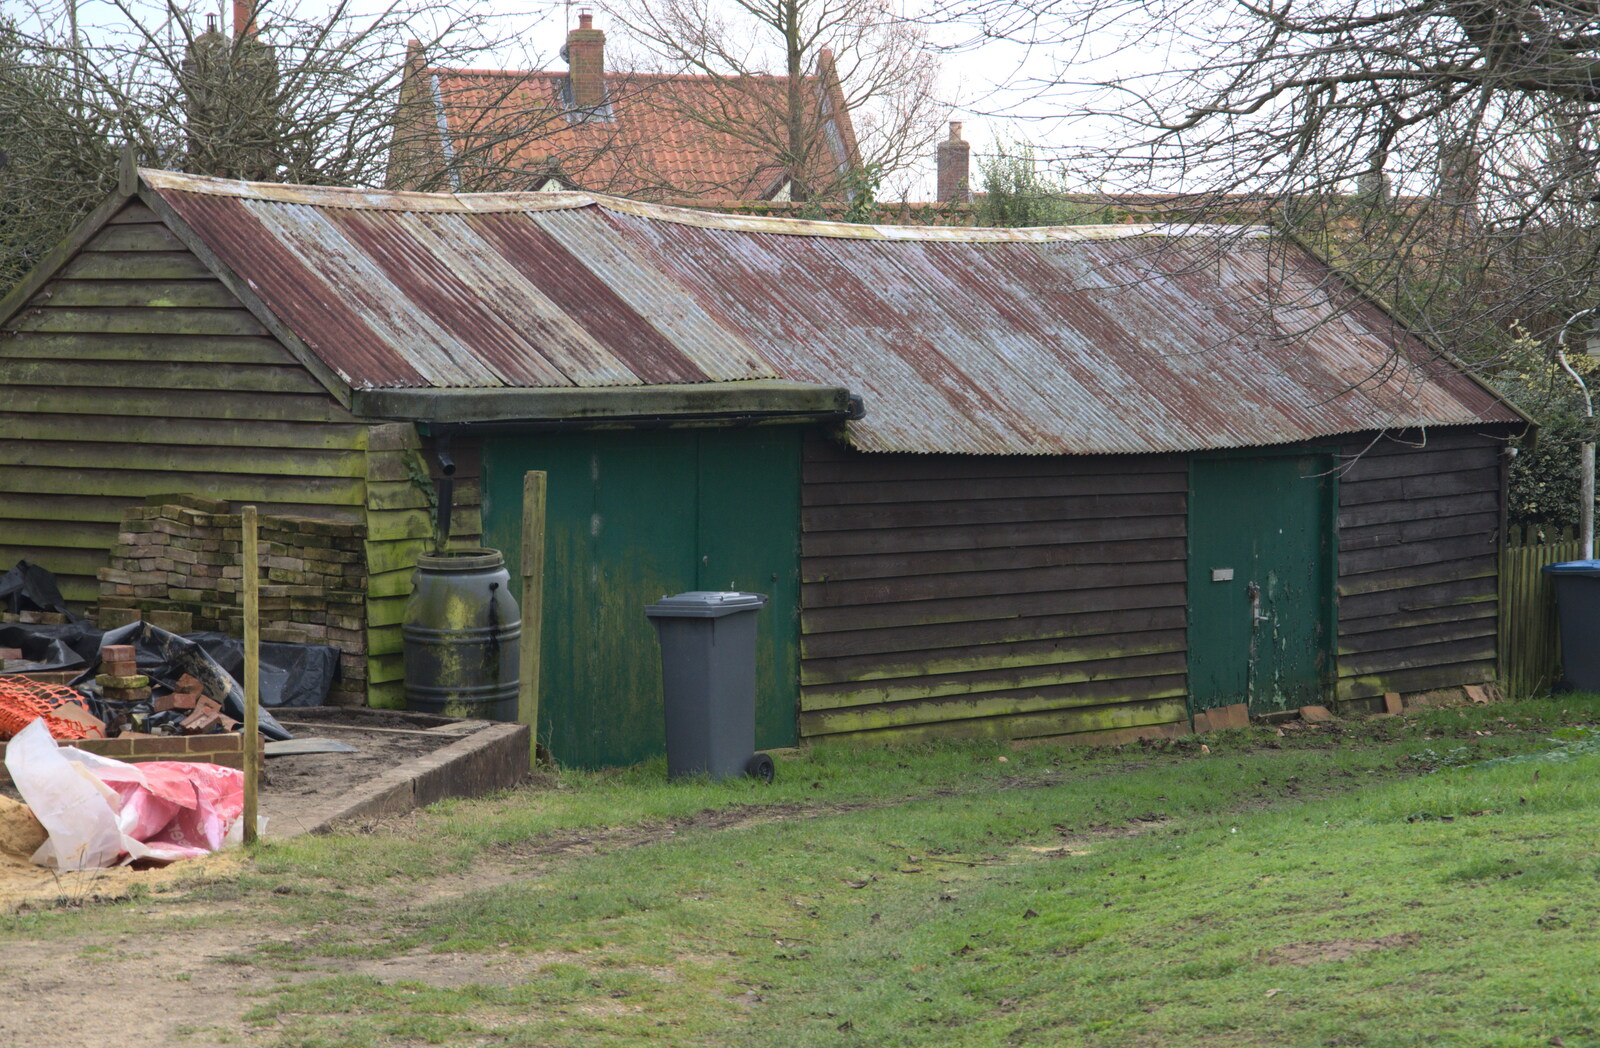 A Trip to Orford, Suffolk - 25th January 2020: Old tin-roofed shed